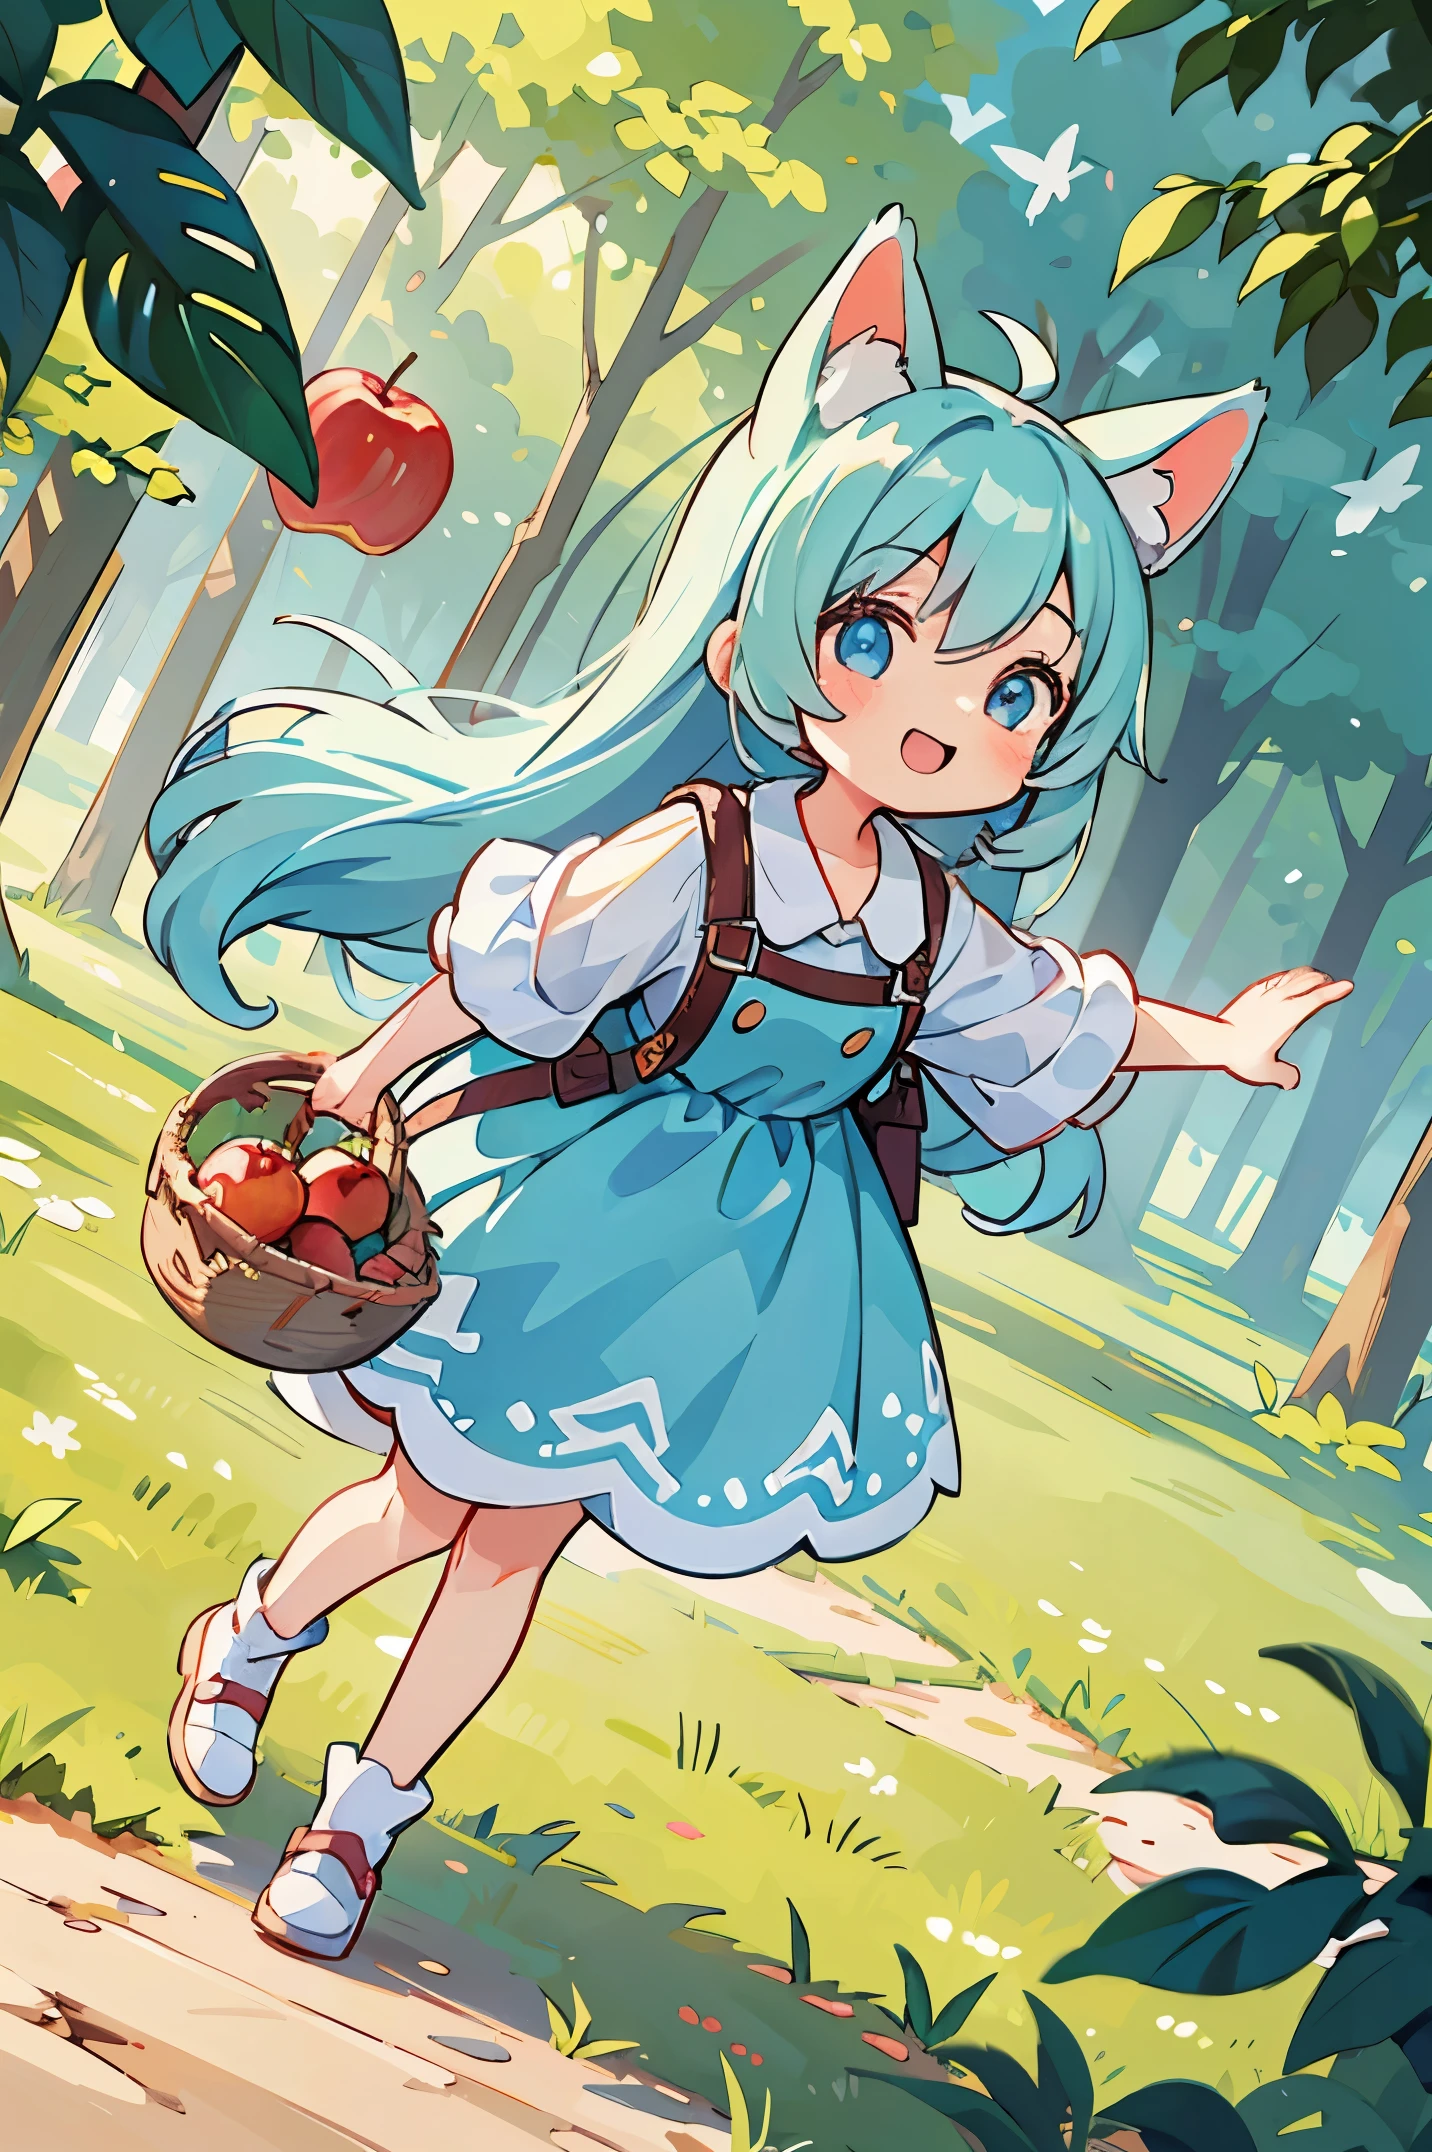 Girl dressed to go on an adventure、Light blue long hair、Twin-tailed、adorable smiling、bustup、Walking while humming、Looks like a lot of fun、There is a basket with apple pie、Take low-angle shots